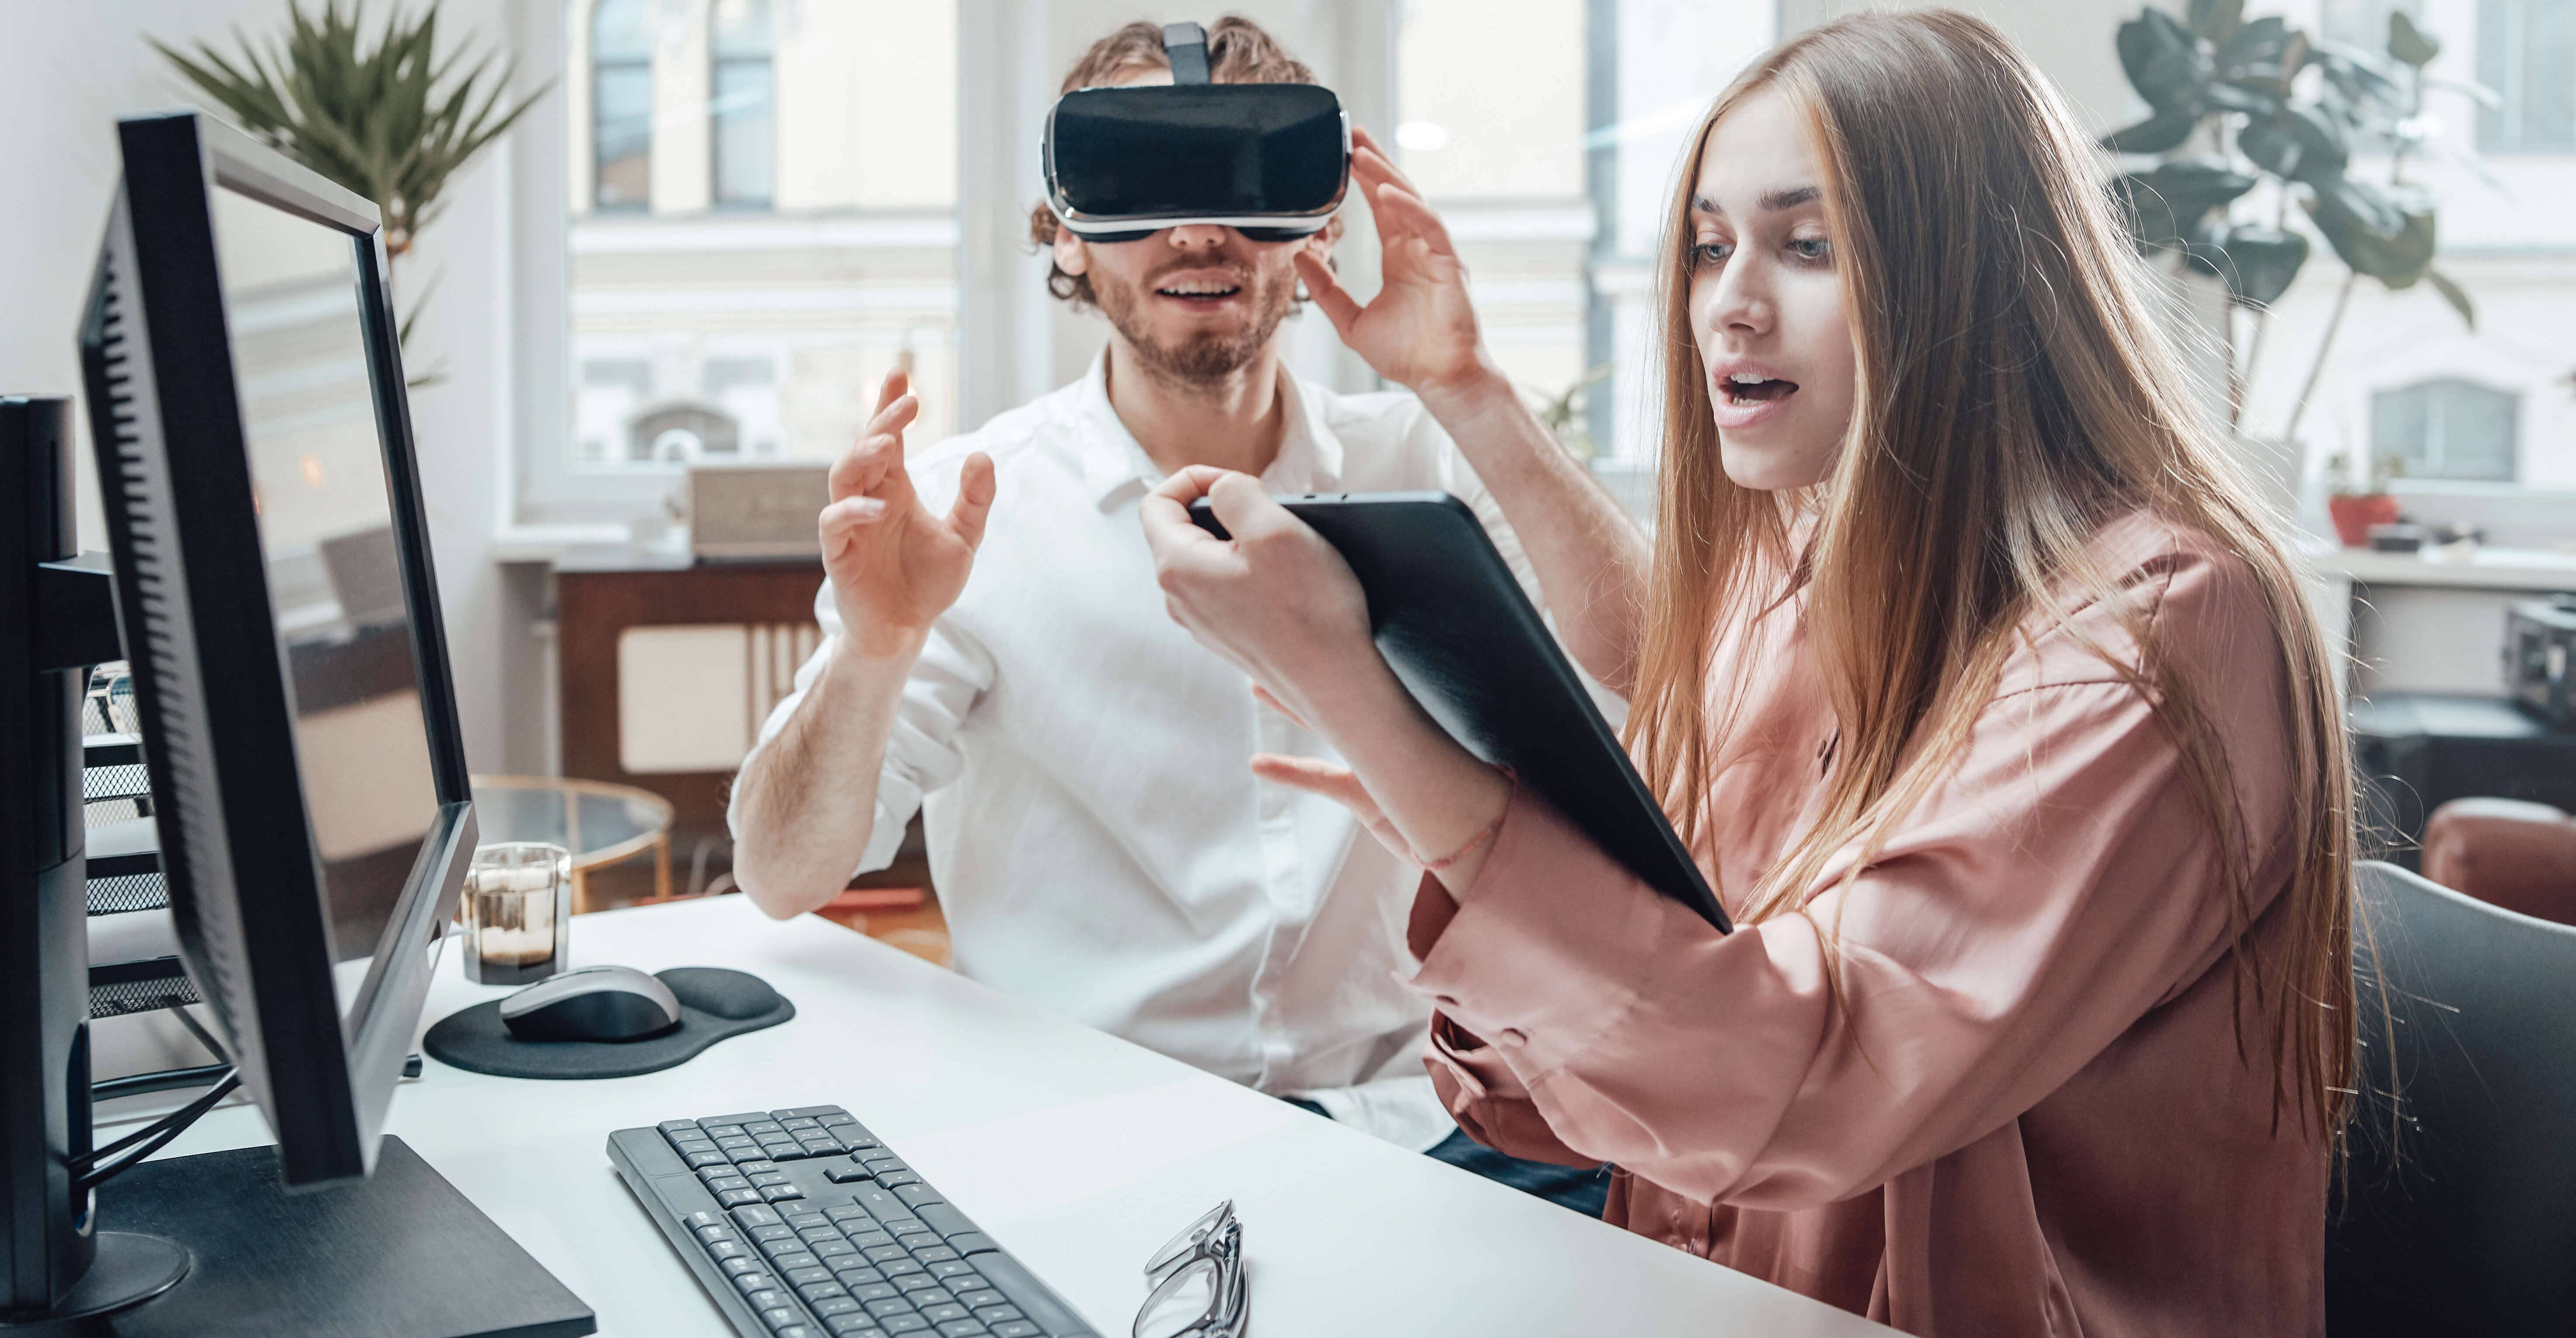 Guy dressed with virtual reality glasses is having fun at work with his female colleague who is using the tablet in the coworking office